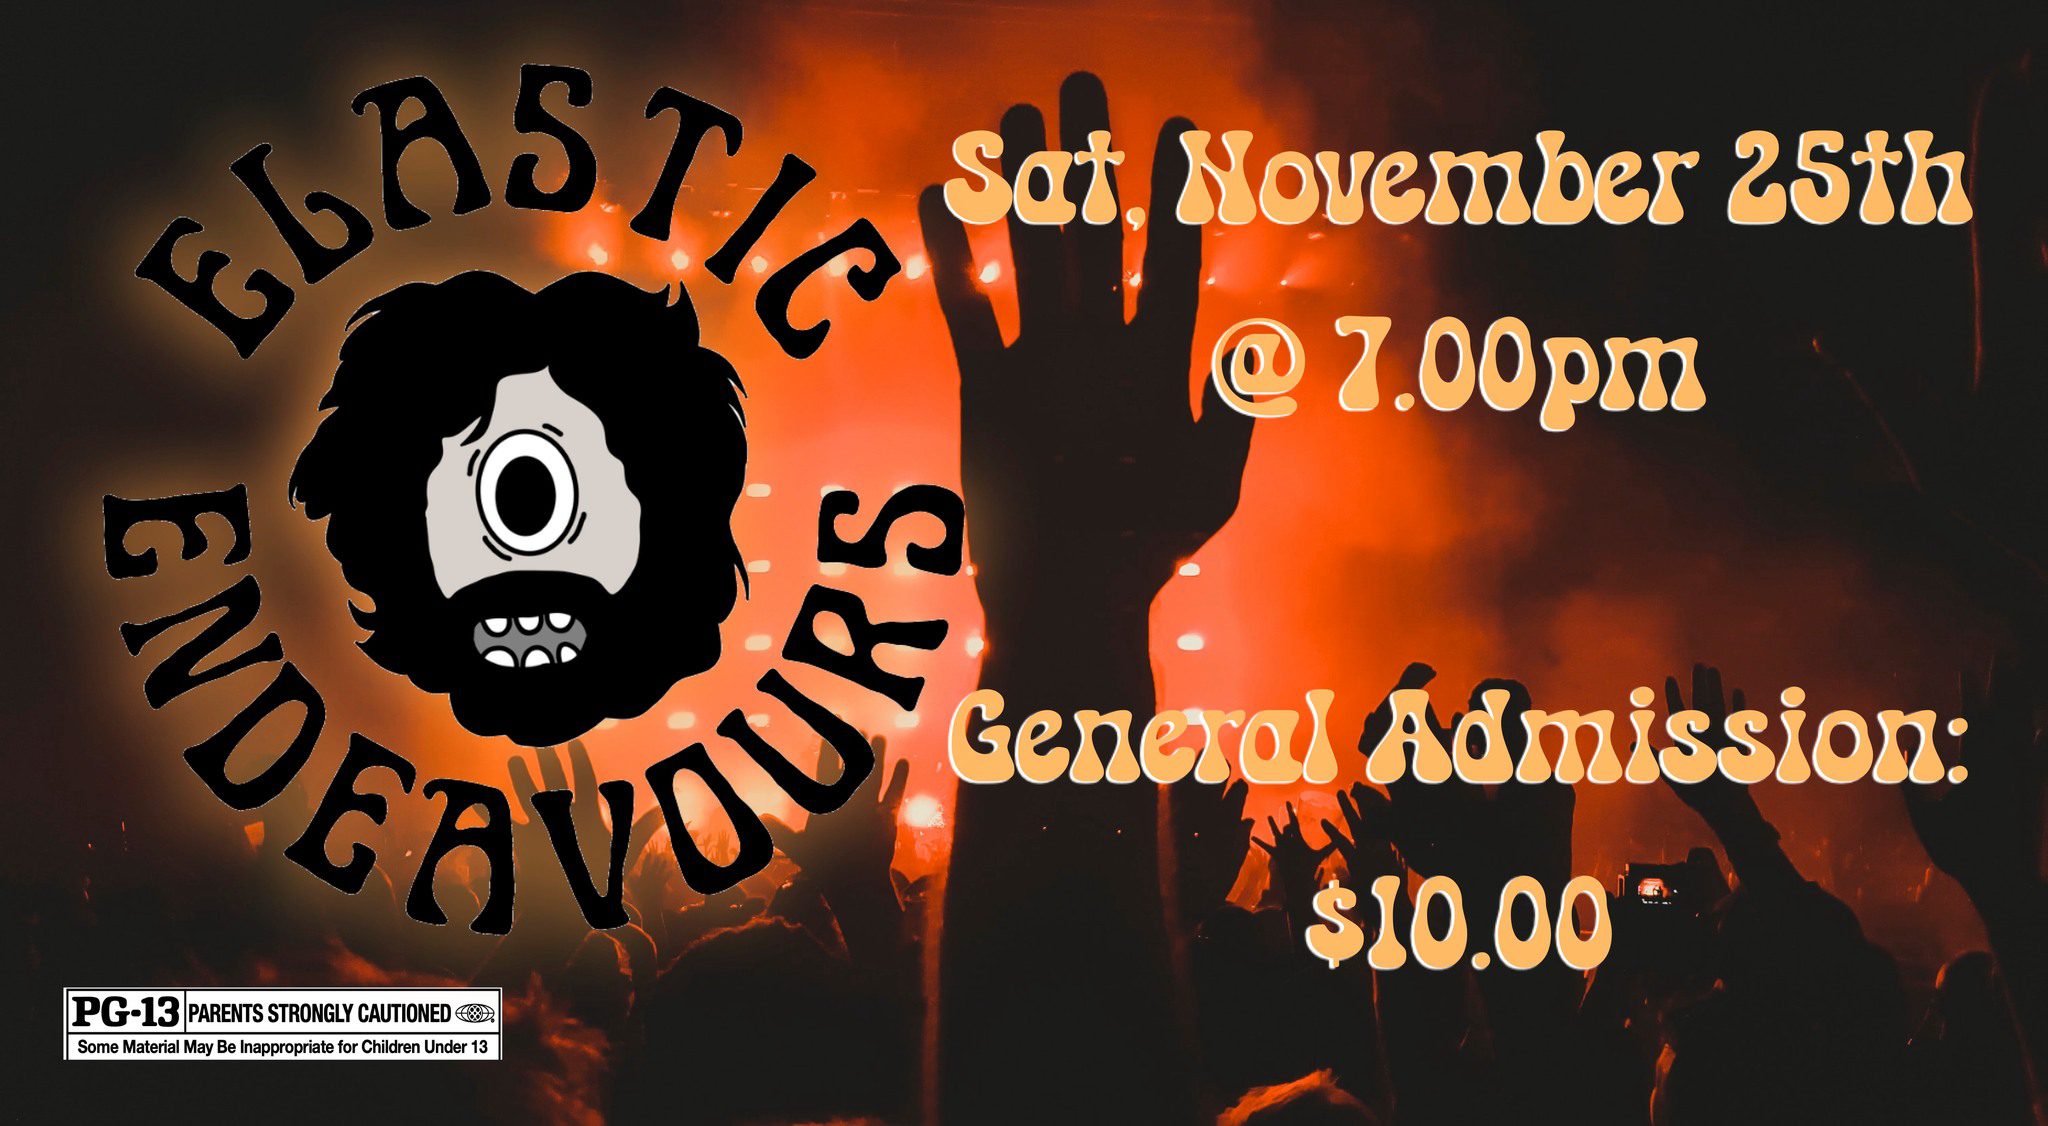 Elastic Endeavor, Glove Theatre Concert, Image from glove theatre Facebook page.